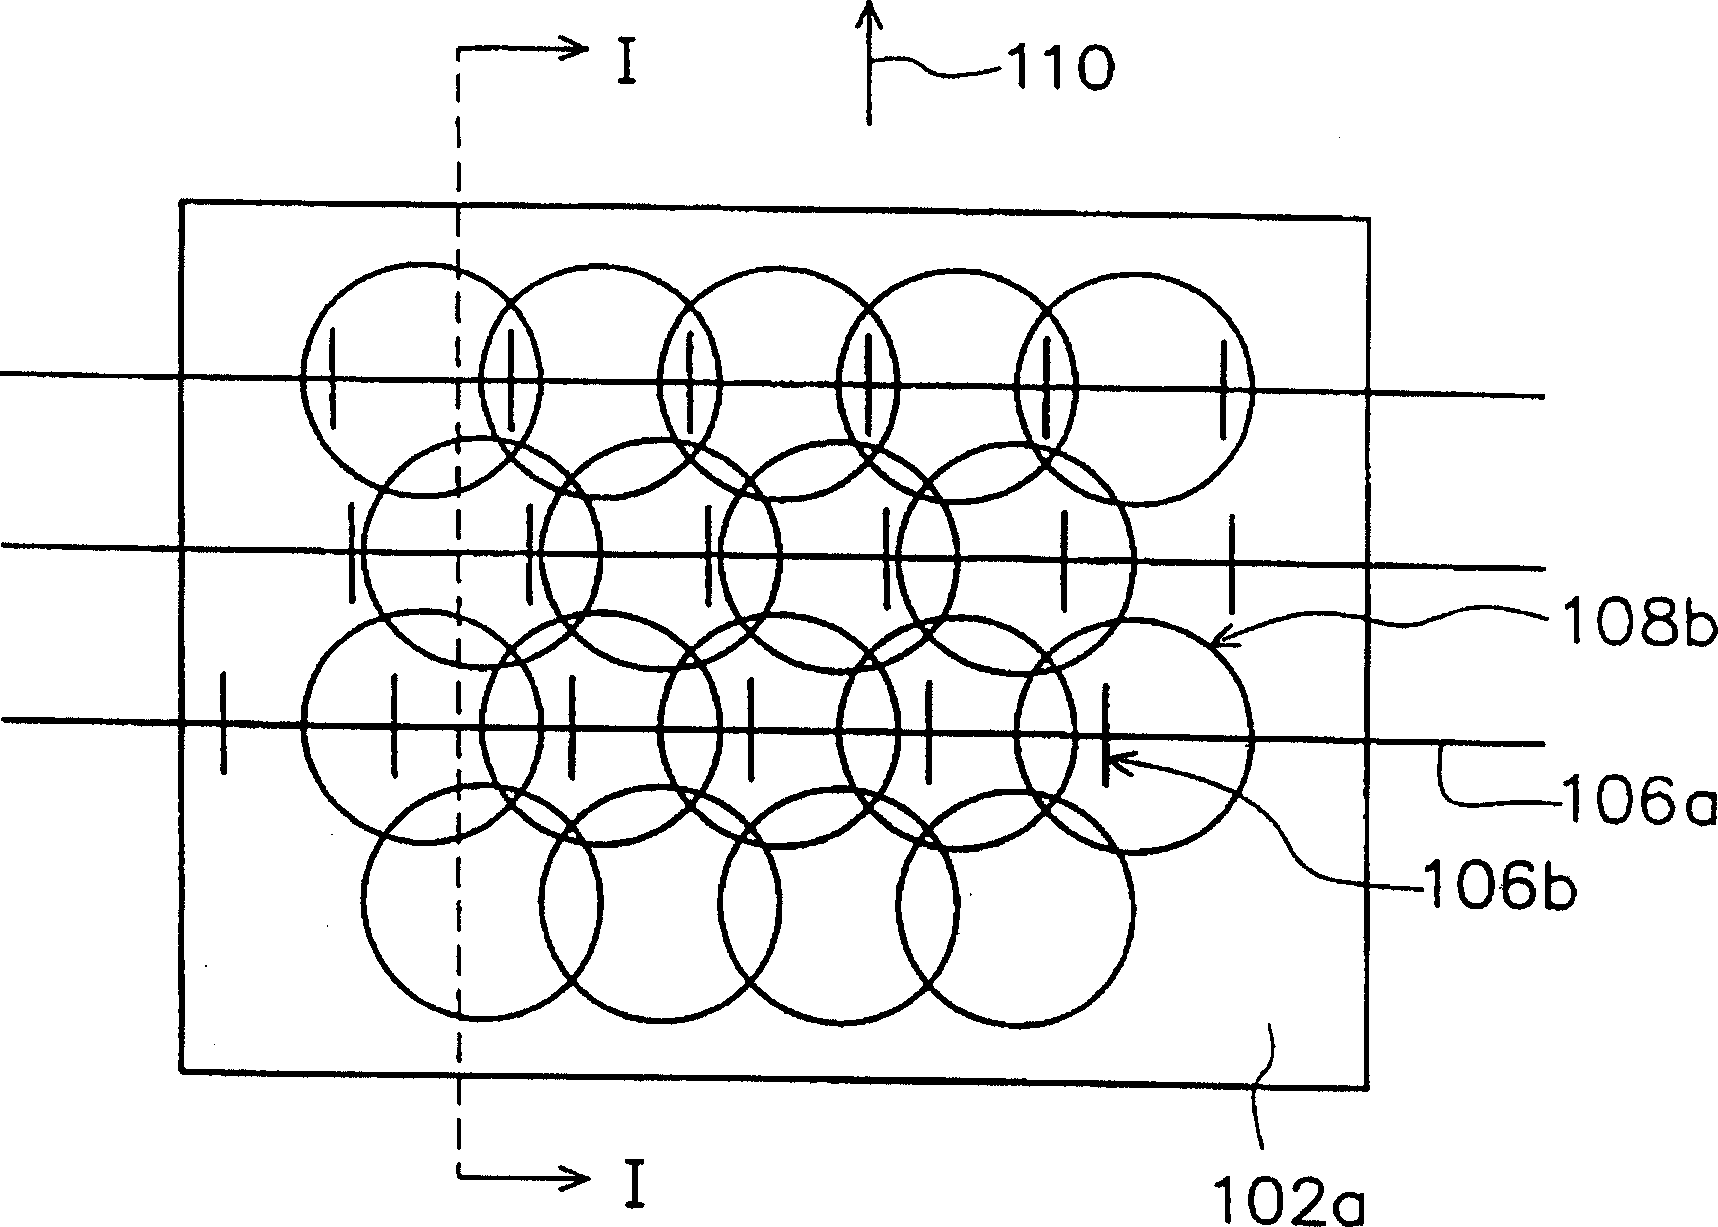 Equipment capable of forming homogenous etching liquid film and etching device